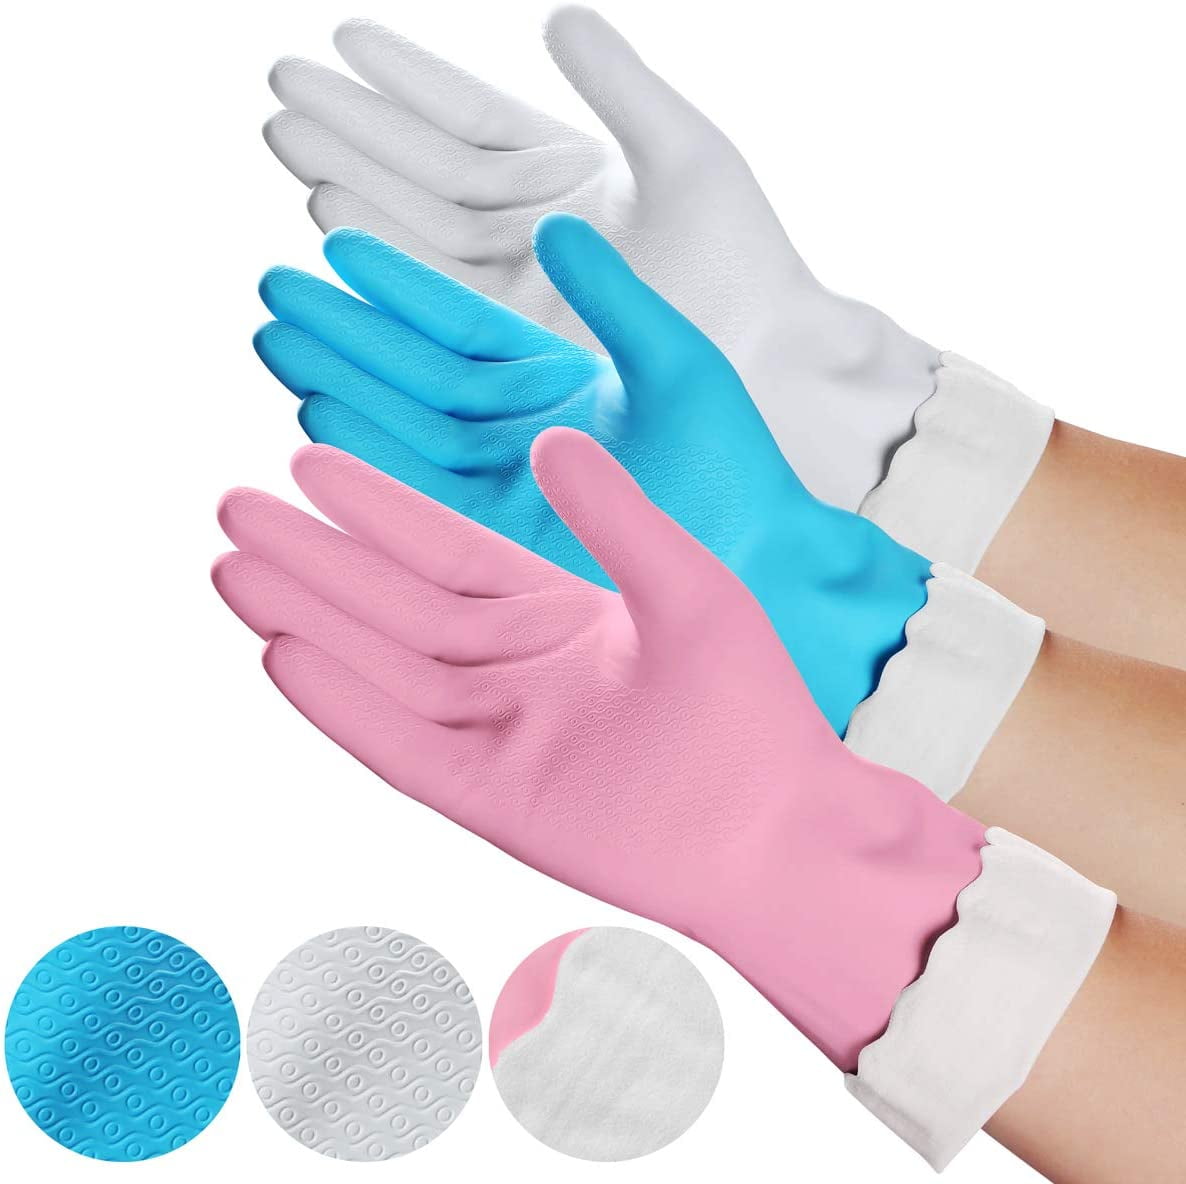 Details about   Reusable Dishwashing Cleaning Gloves with Latex Free Household Cleaning Gloves 